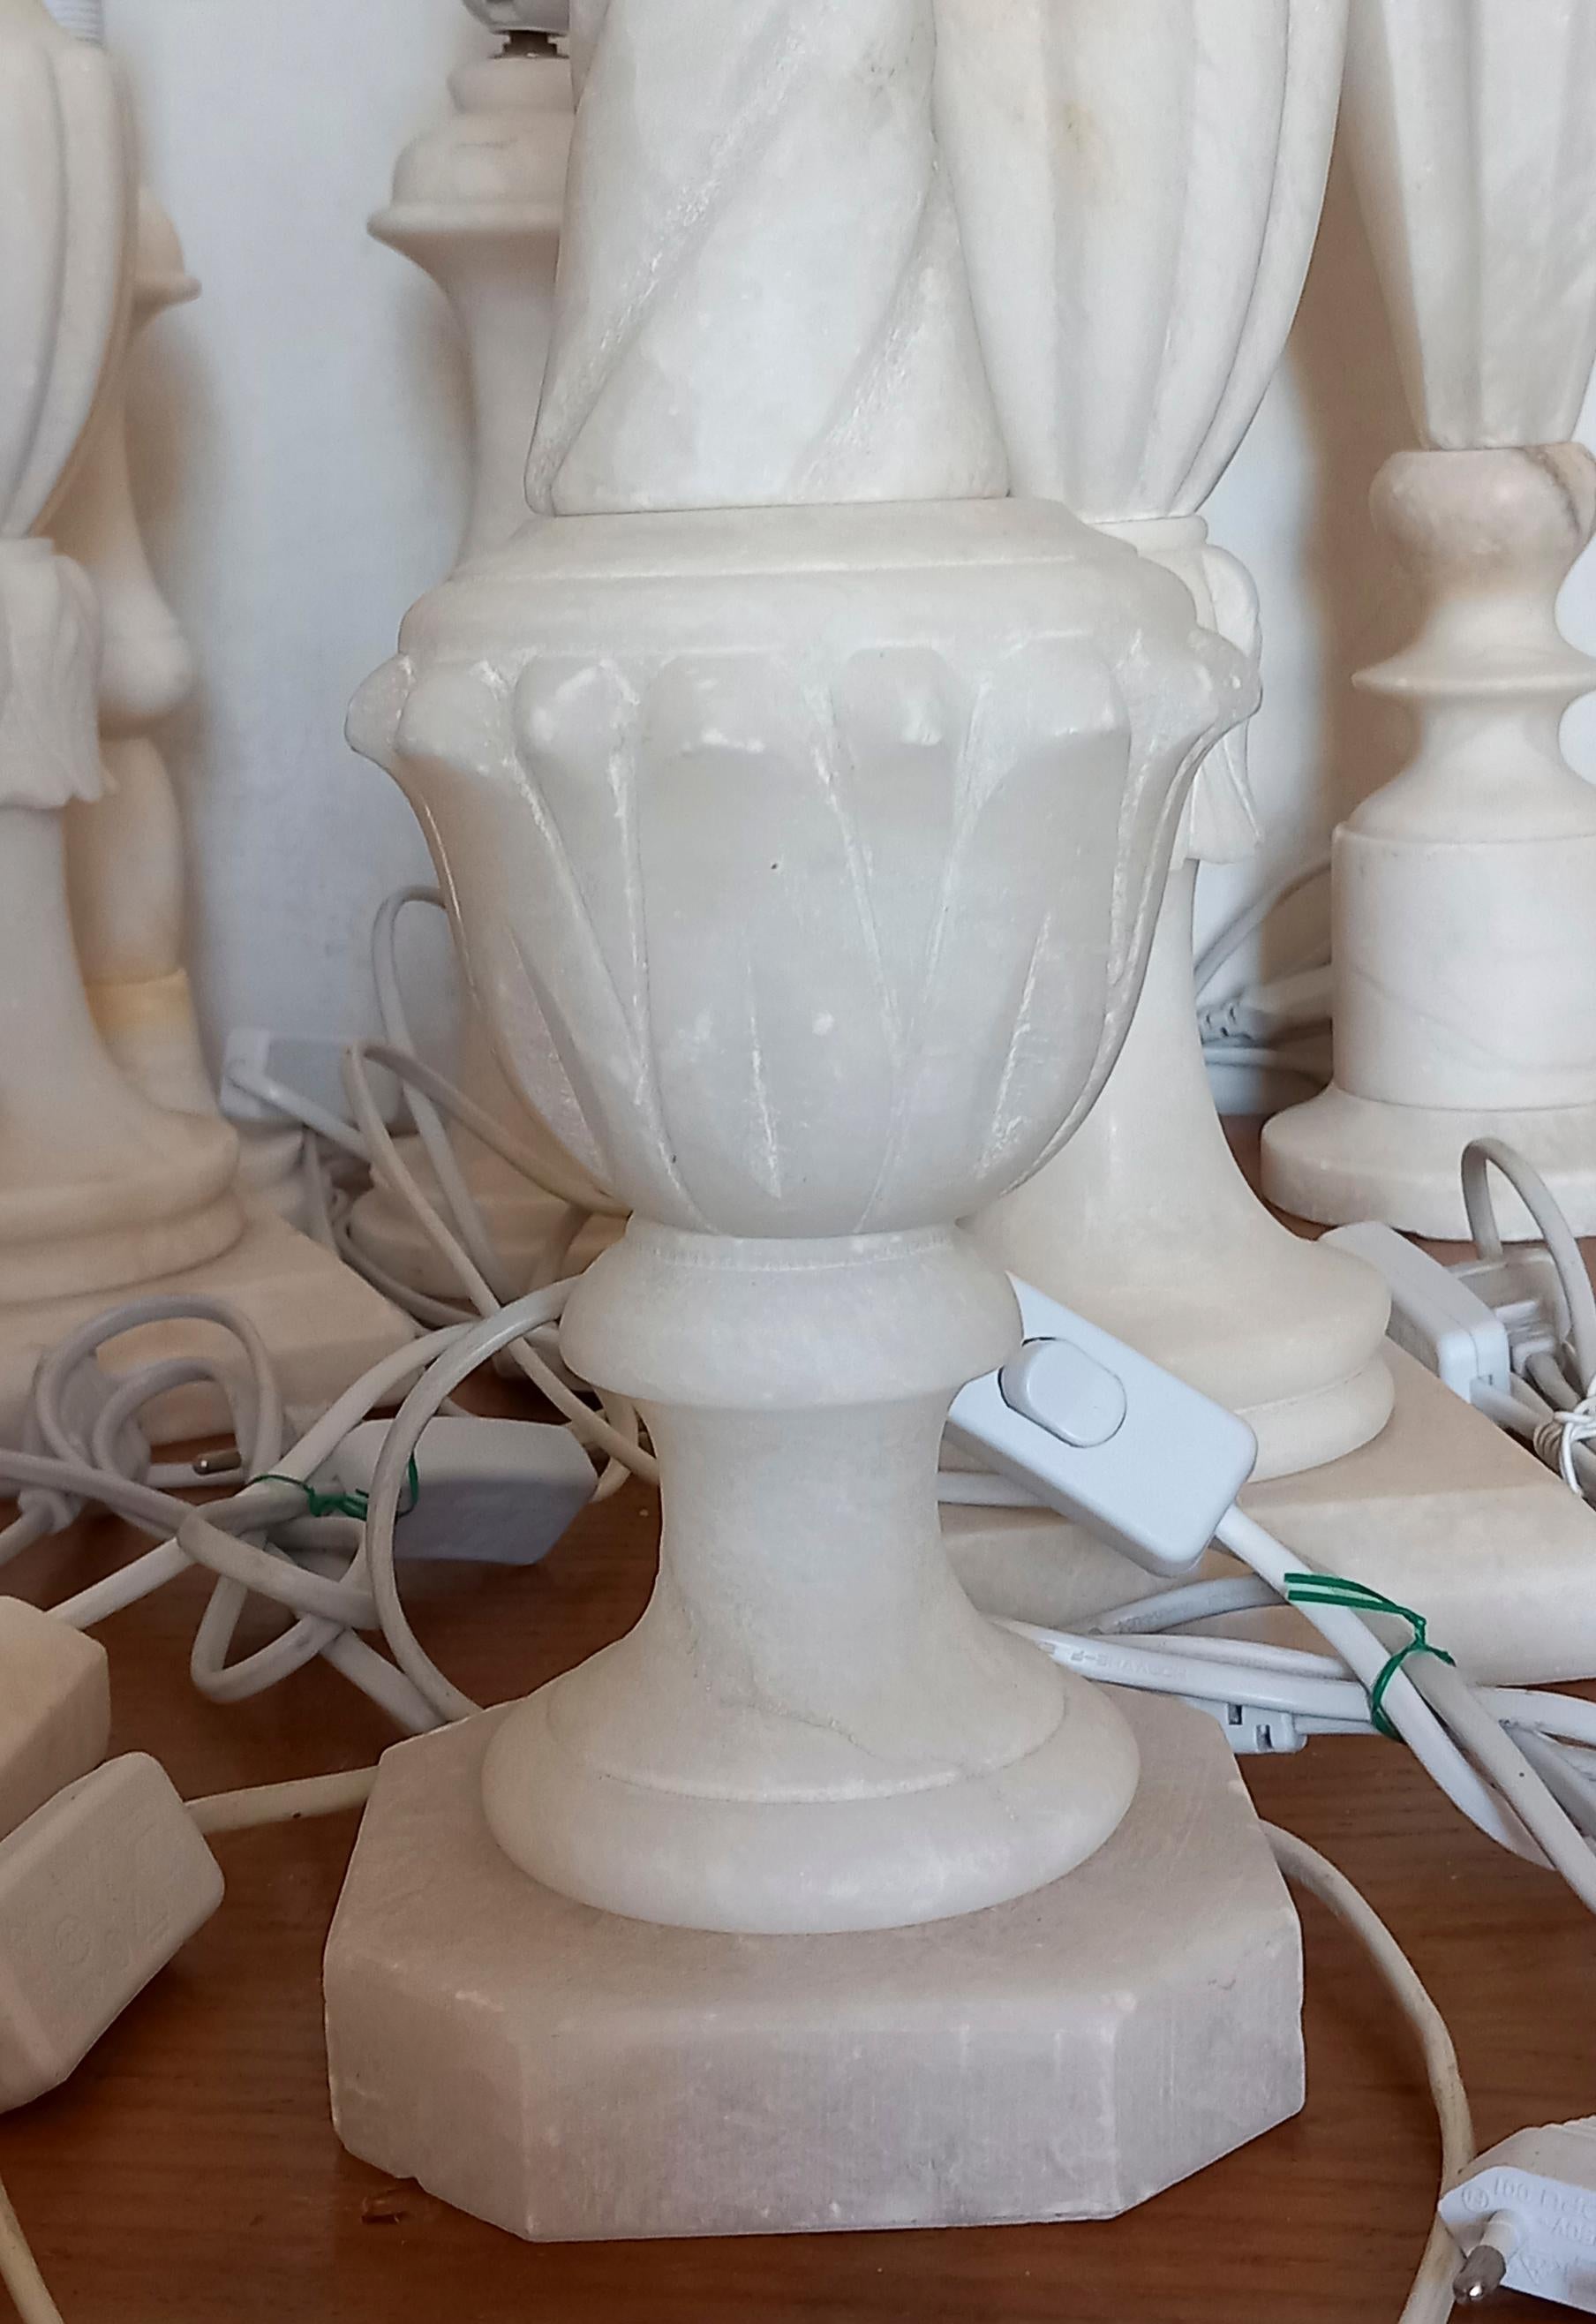 Precious lamps of alabaster or staturium marble(marble used to make sculpture) it is difficult to distinguish
They are tall, stylized and elegant lamps
 They are very well made and are in perfect condition.
Due to their size, these lamps are perfect